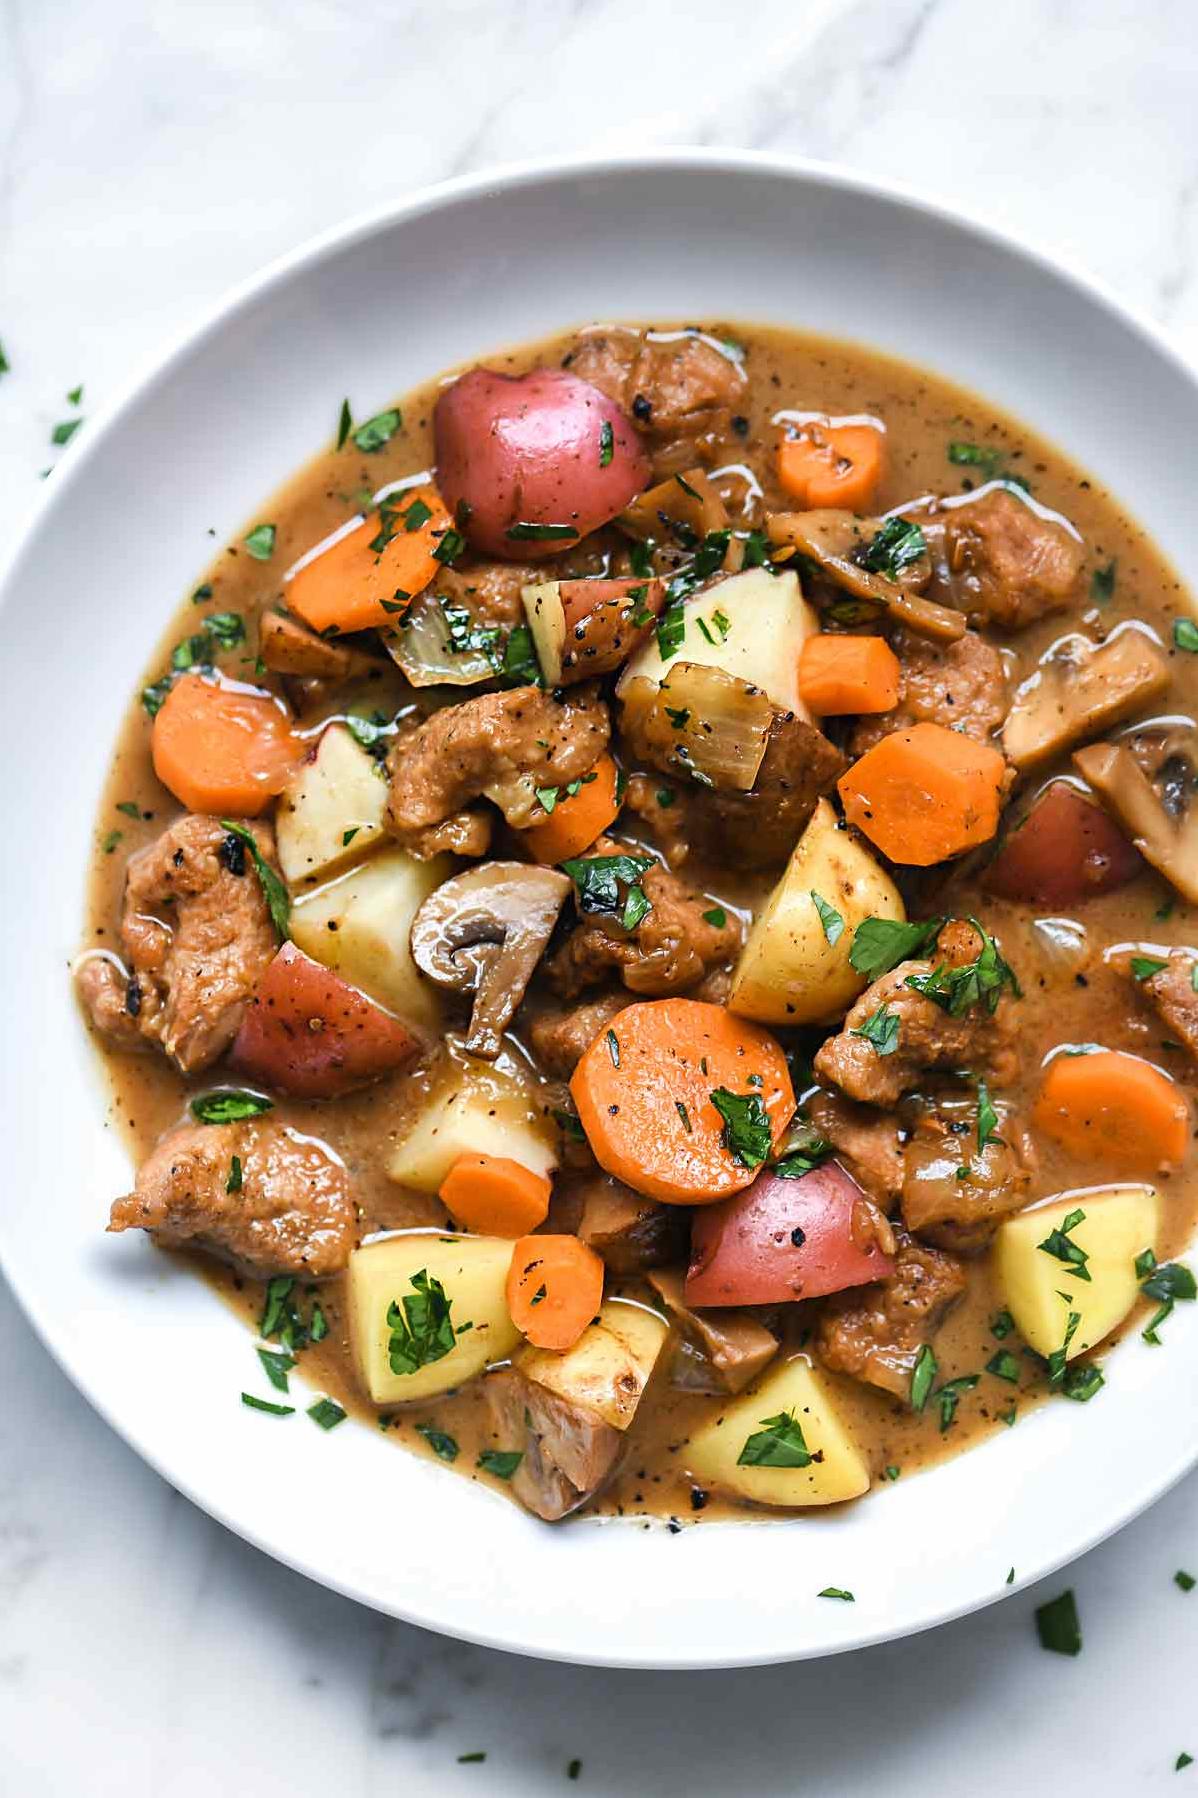 Delicious and Hearty Pork Stew Recipe